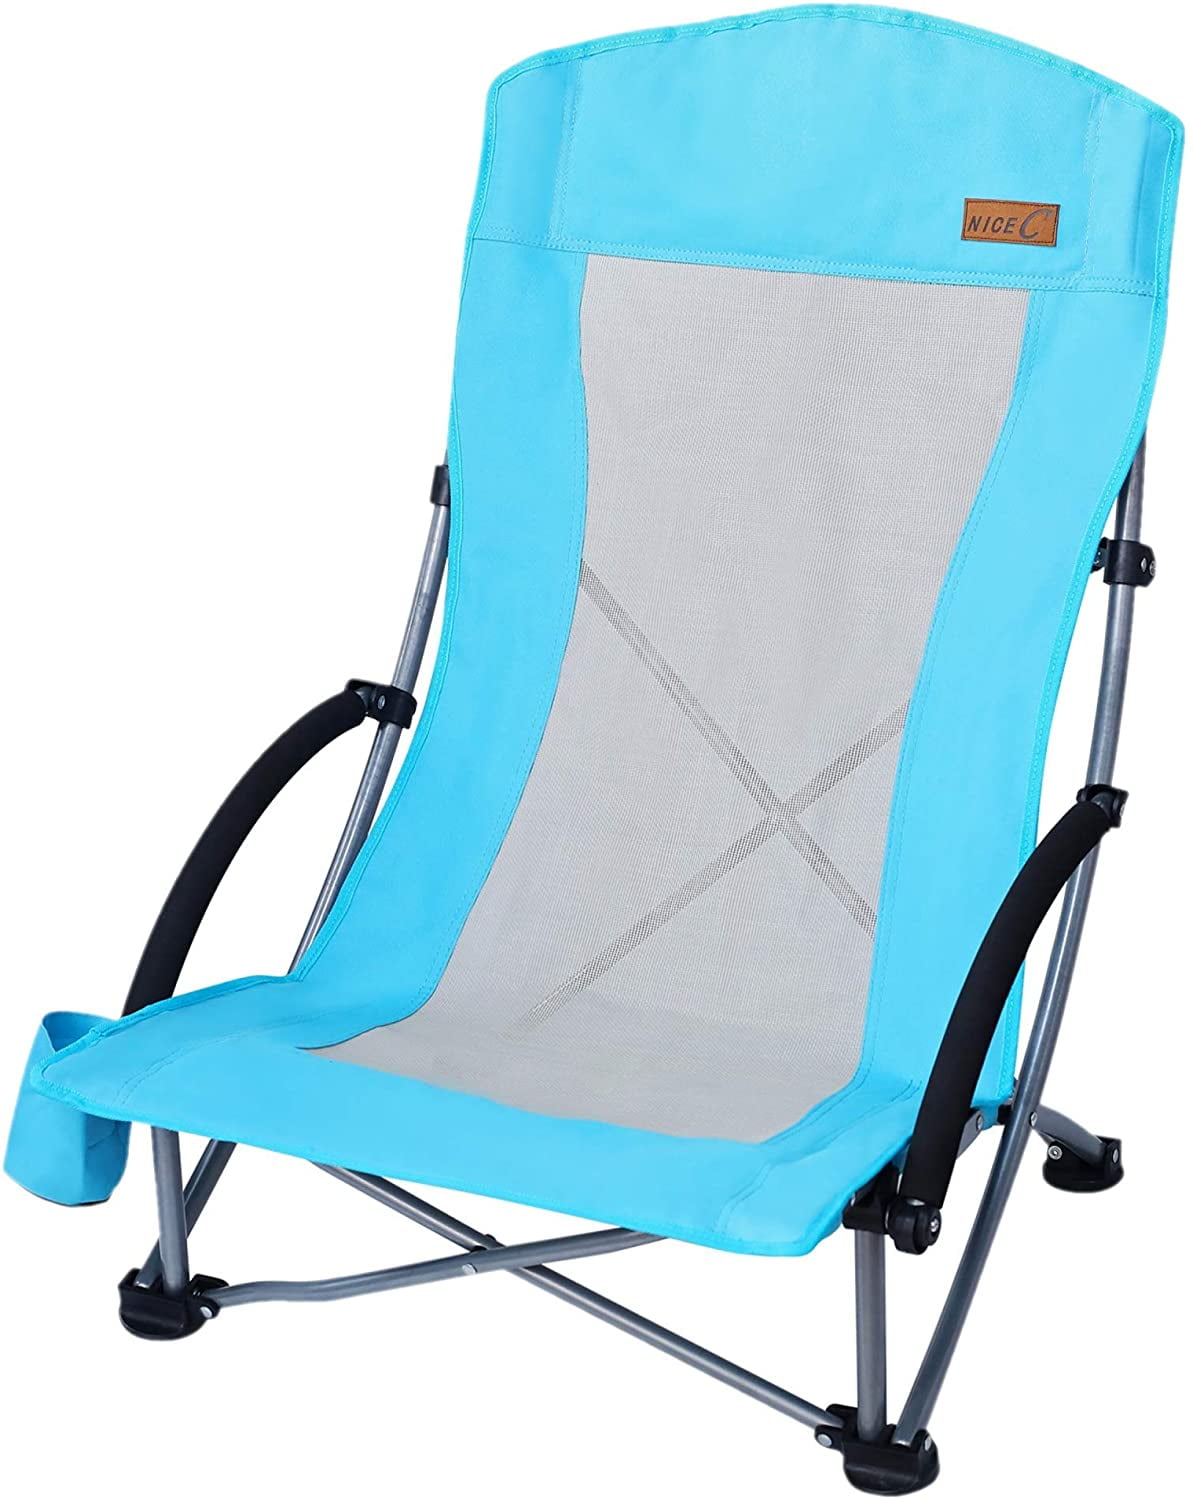 FOLDING CAMPING FISHING CHAIR SEAT WITH CUP HOLDER & CARRY BAG BBQ PICNIC HIKING 